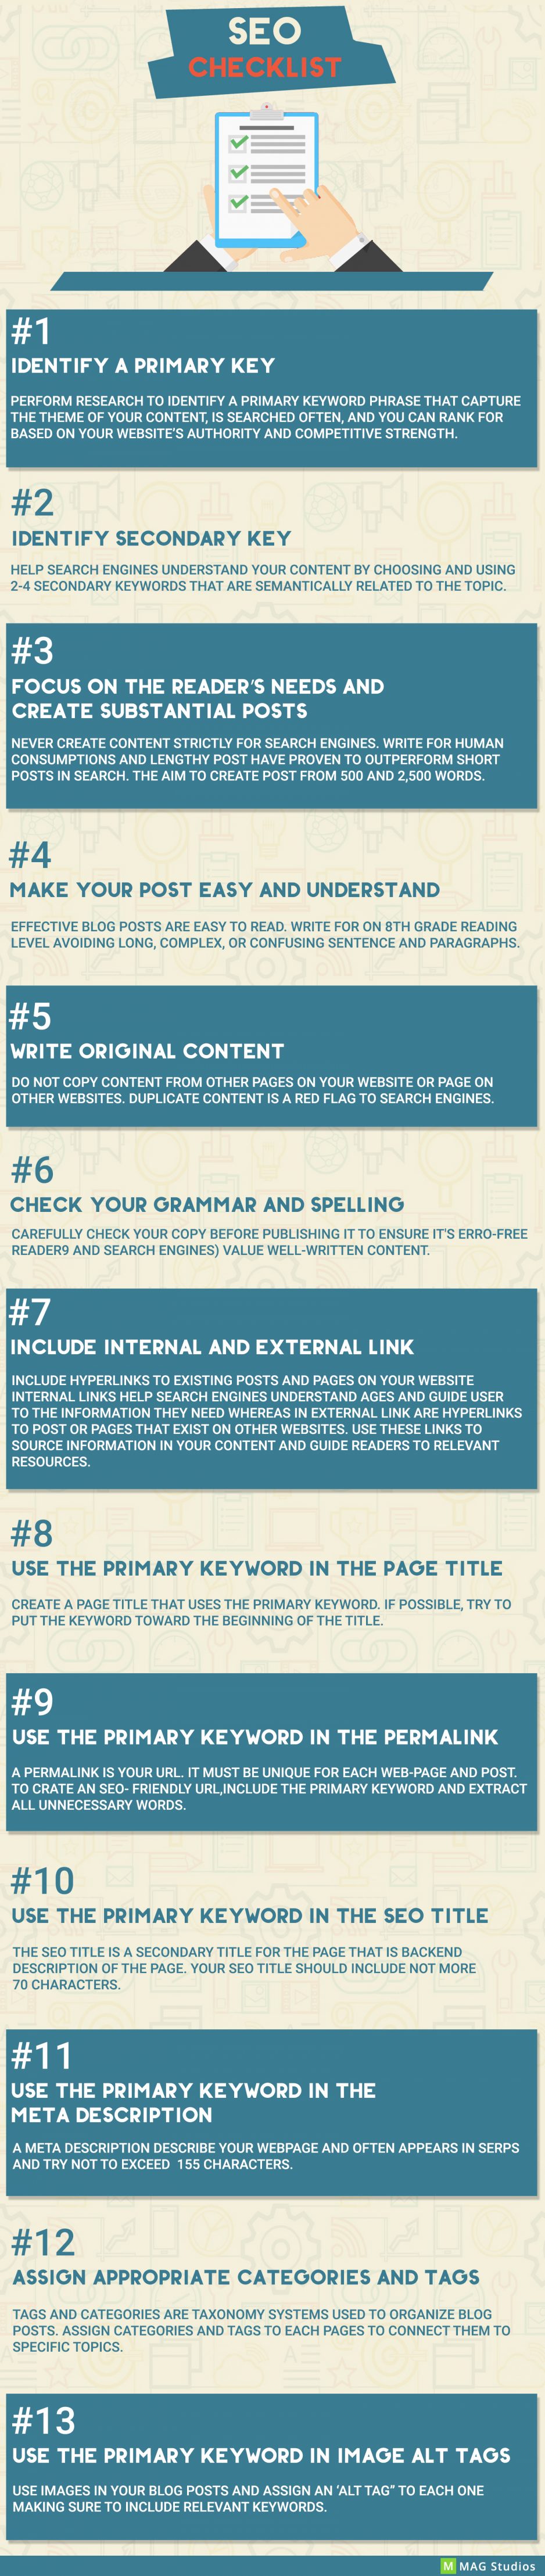 SEO CHECKLIST TO CHANGE YOUR RANKING GAME!